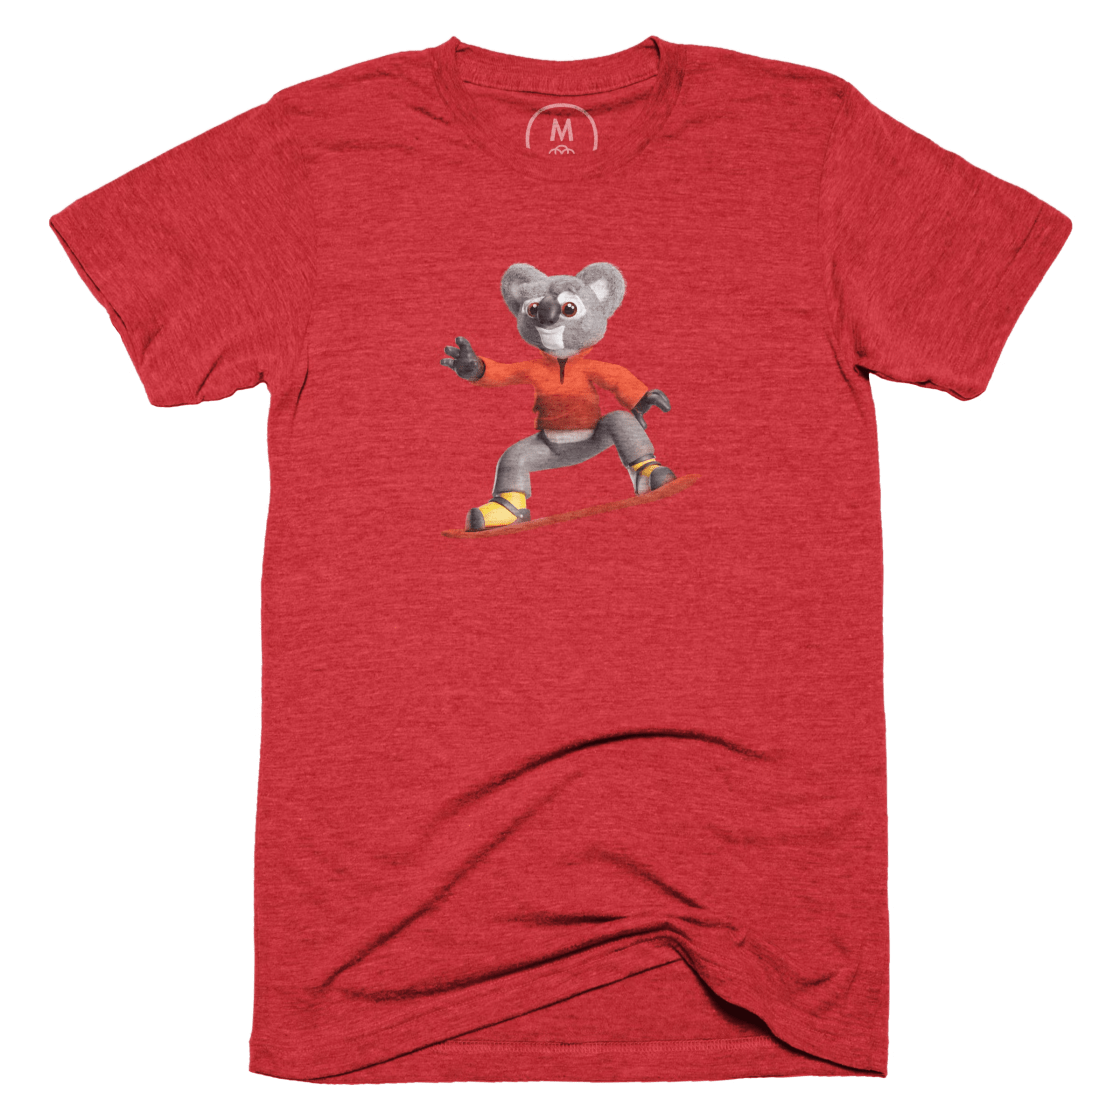 Red T-Shirt with a Koala